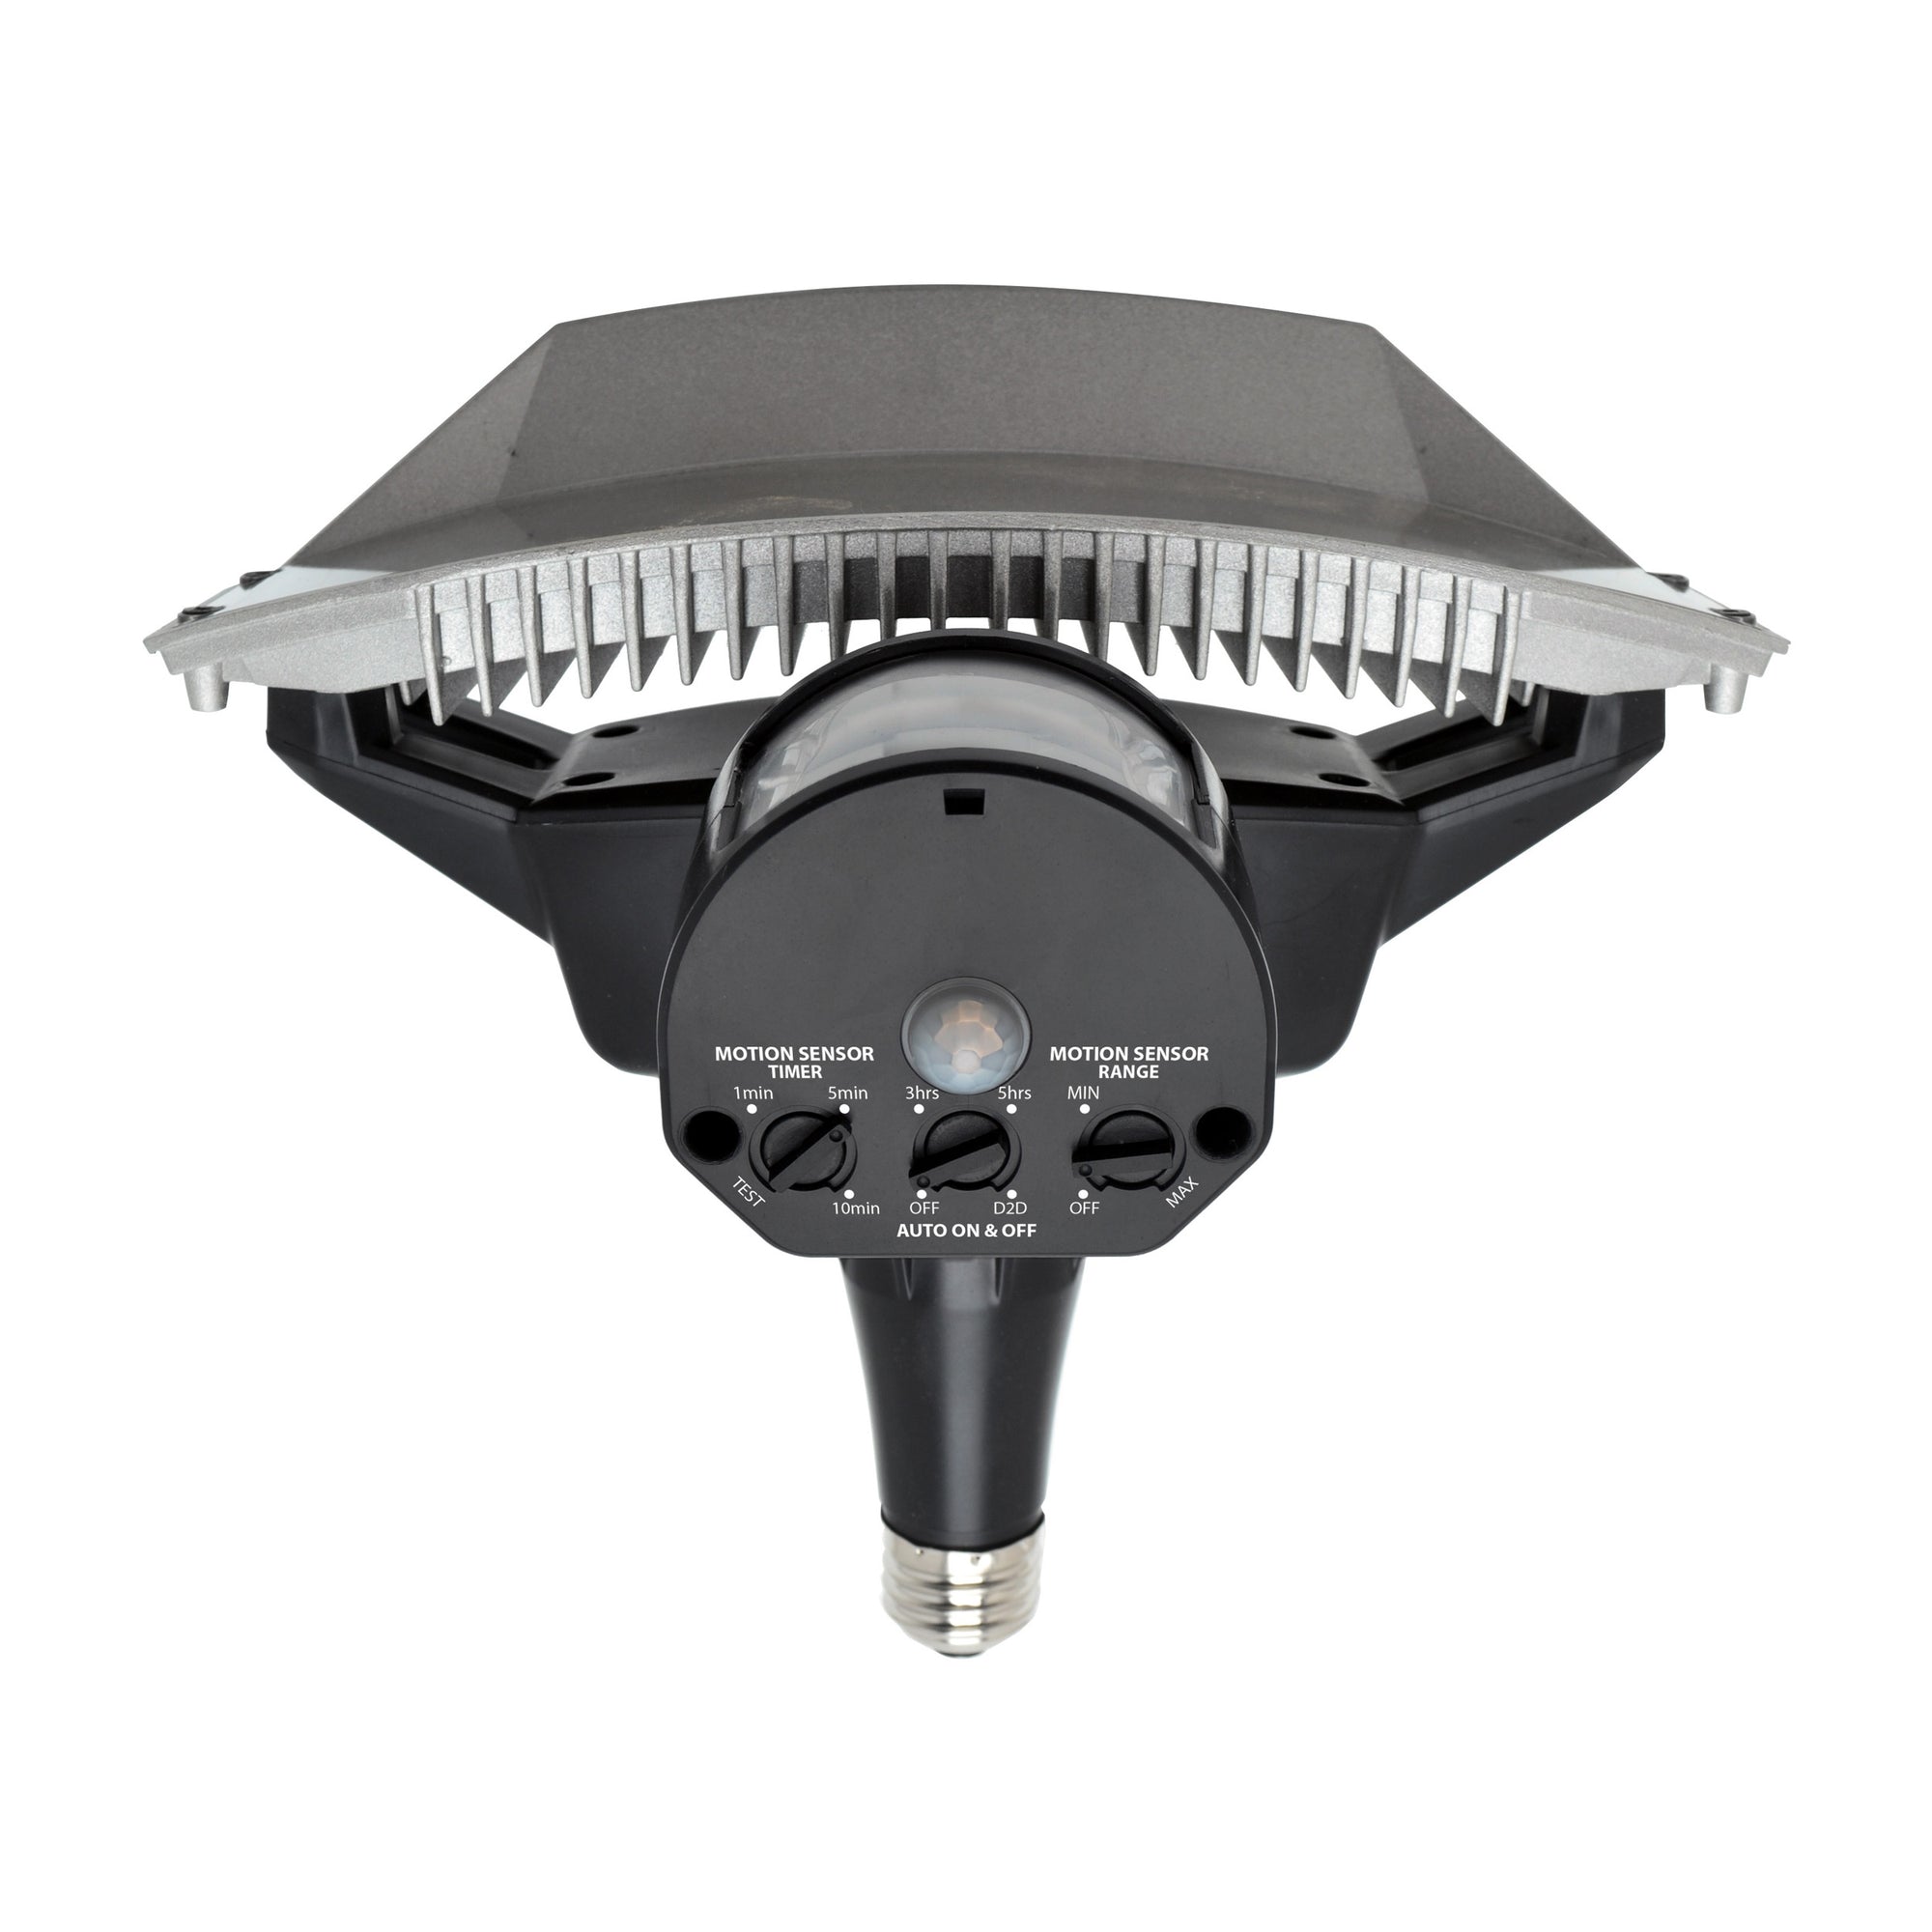 Outdoor Security Motion Flood light for your yard by STKR Concepts - bottom controls